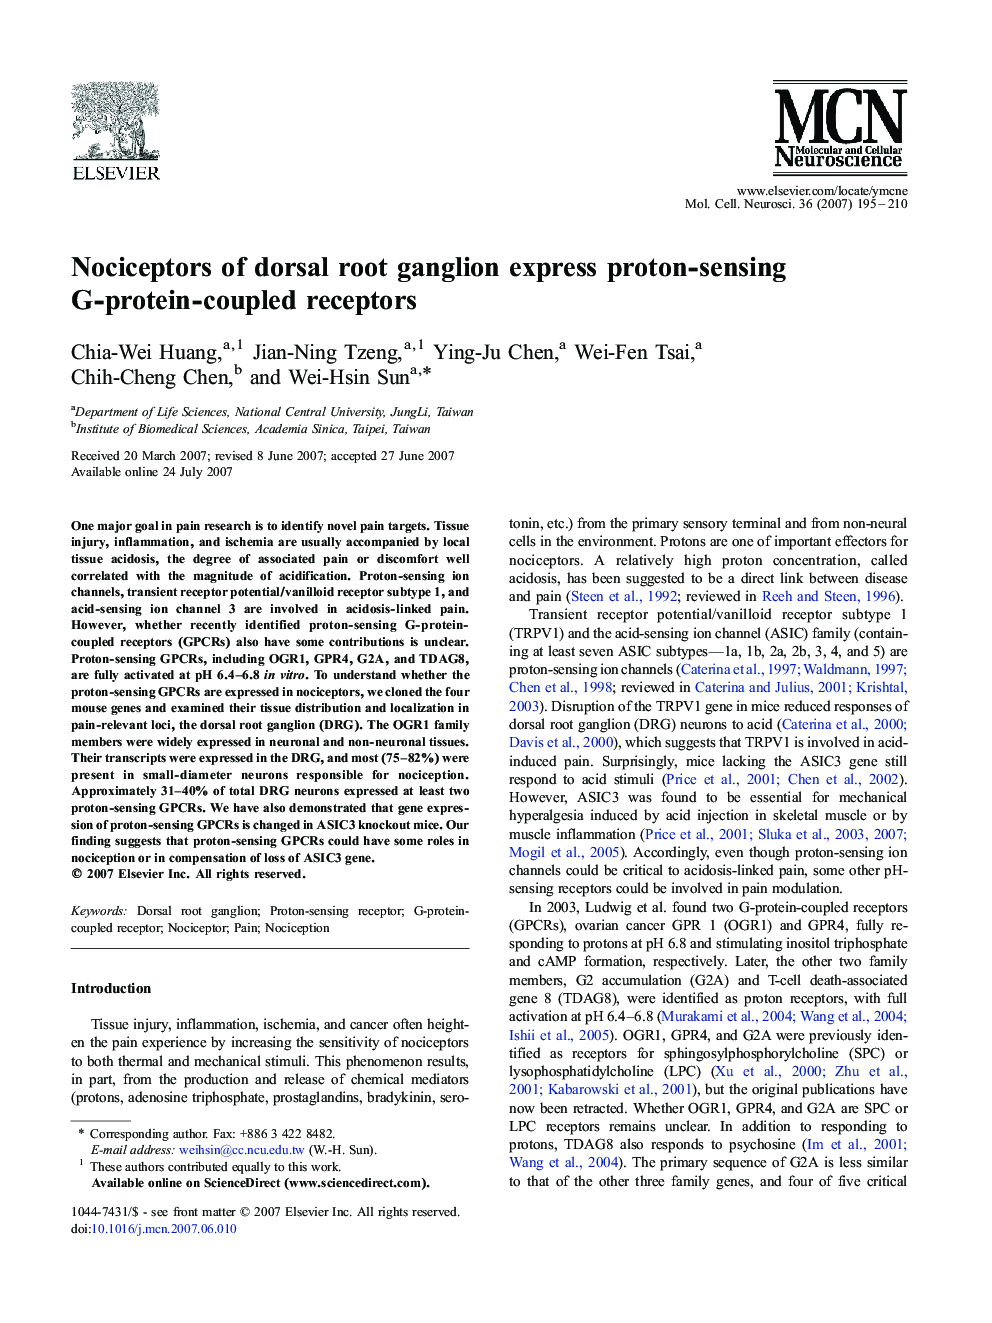 Nociceptors of dorsal root ganglion express proton-sensing G-protein-coupled receptors